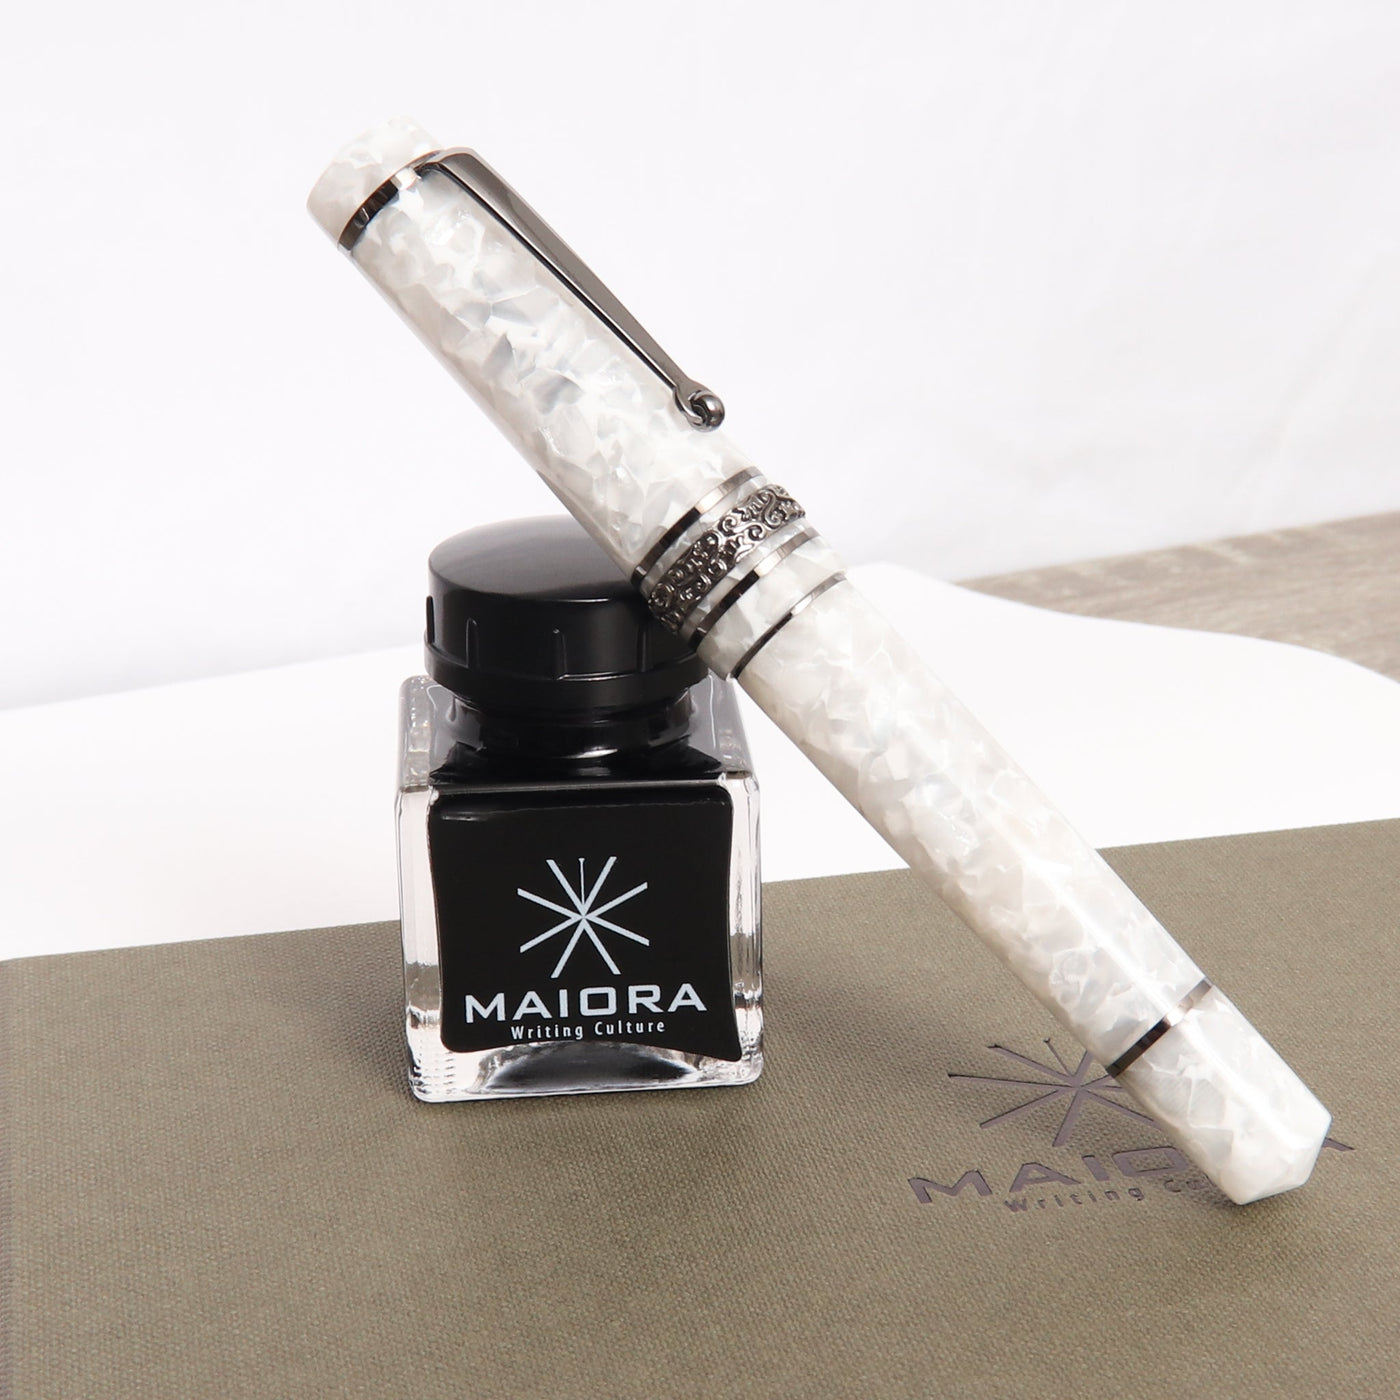 Maiora Perla Nera Limited Edition 98 Fountain Pen With Bottle of Ink